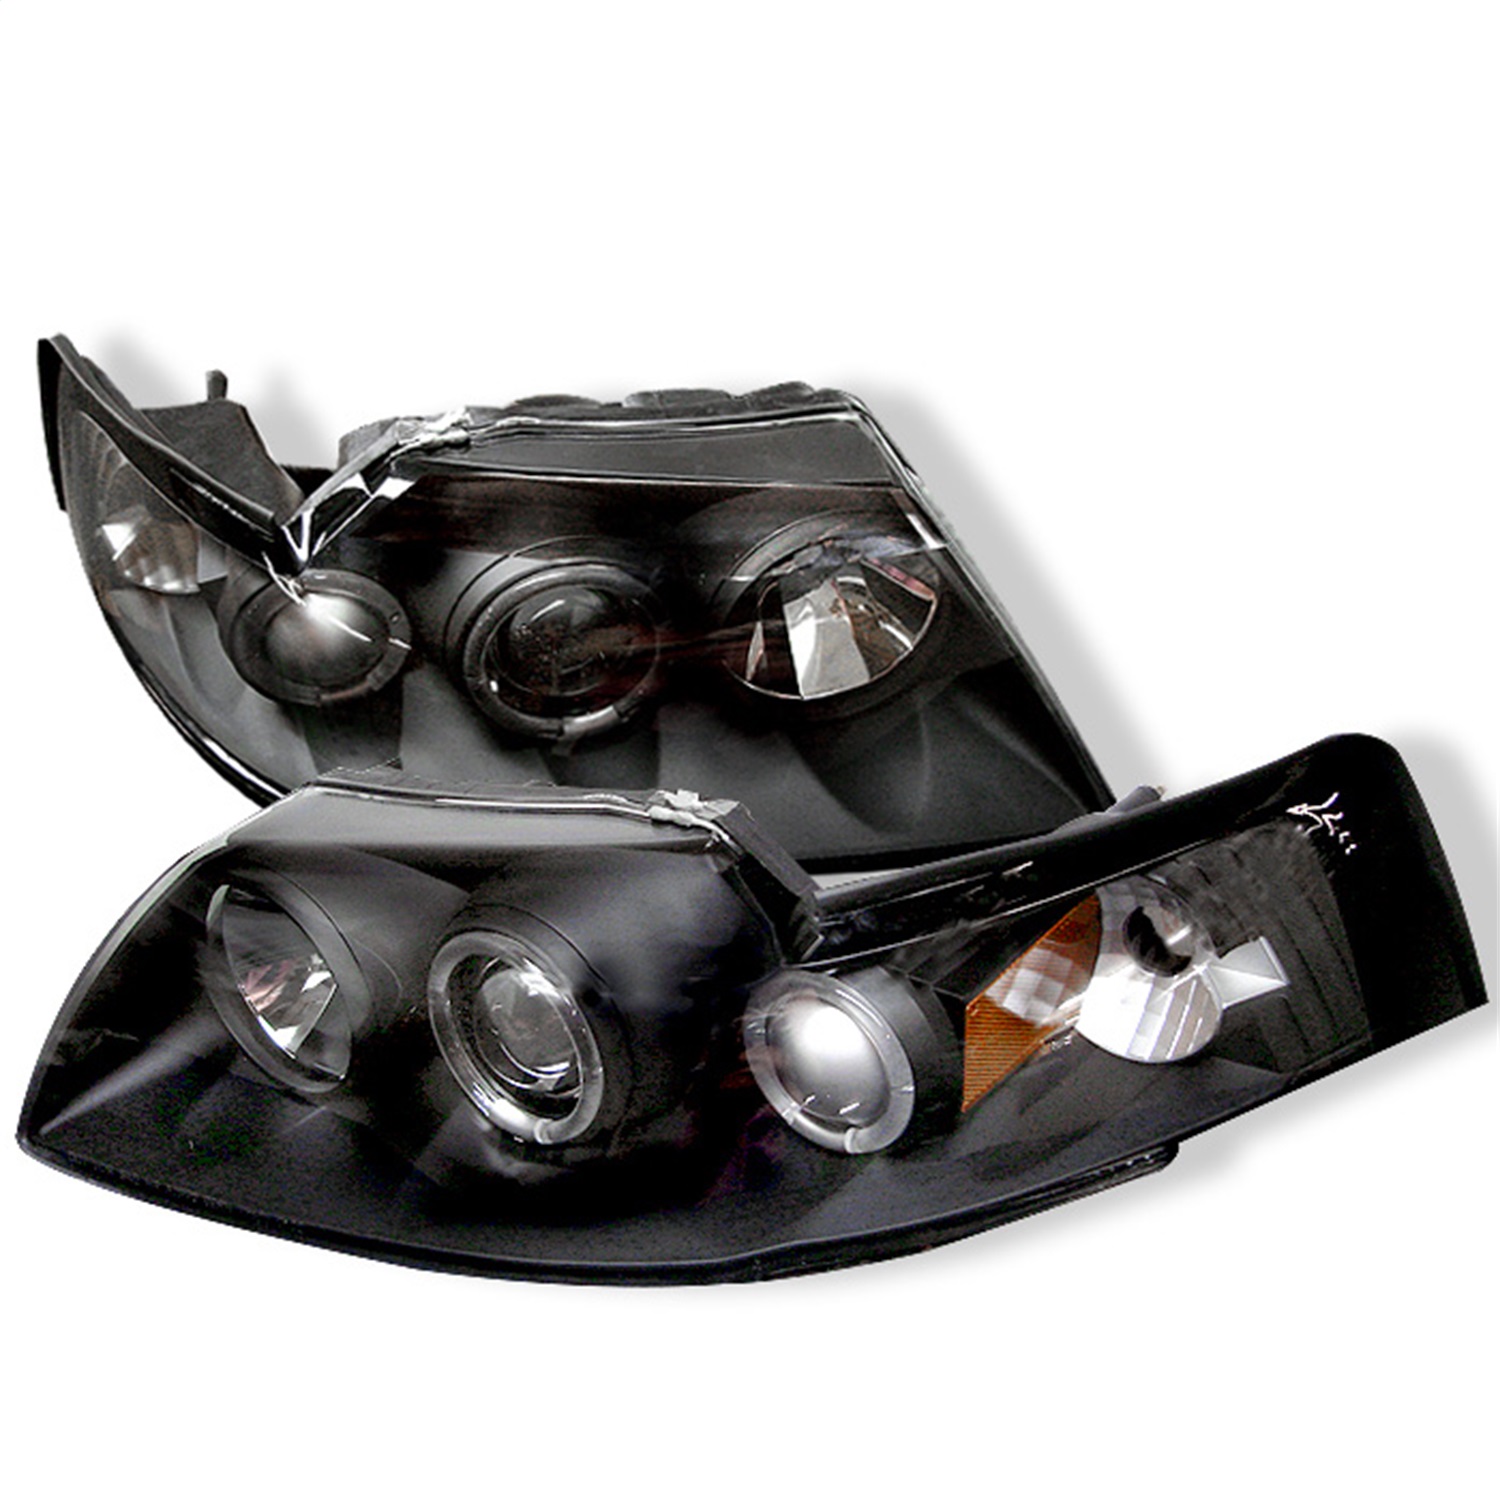 Spyder Auto 5010445 Halo Projector Headlights Fits 99-04 Mustang